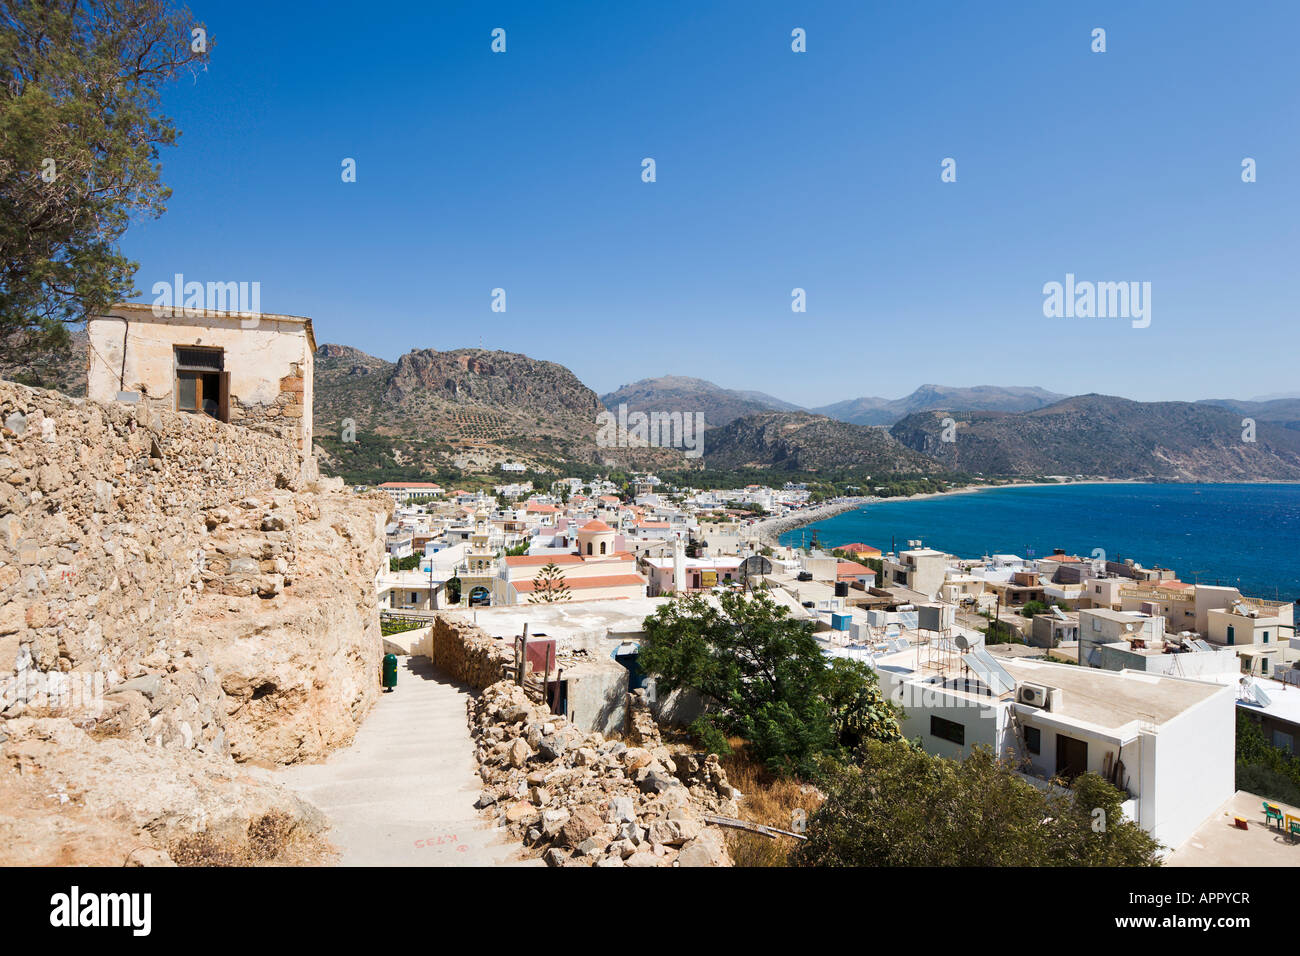 View over the village and beach from the Castle, Paleochora, South West Coast, Hania Province, Crete, Greece Stock Photo